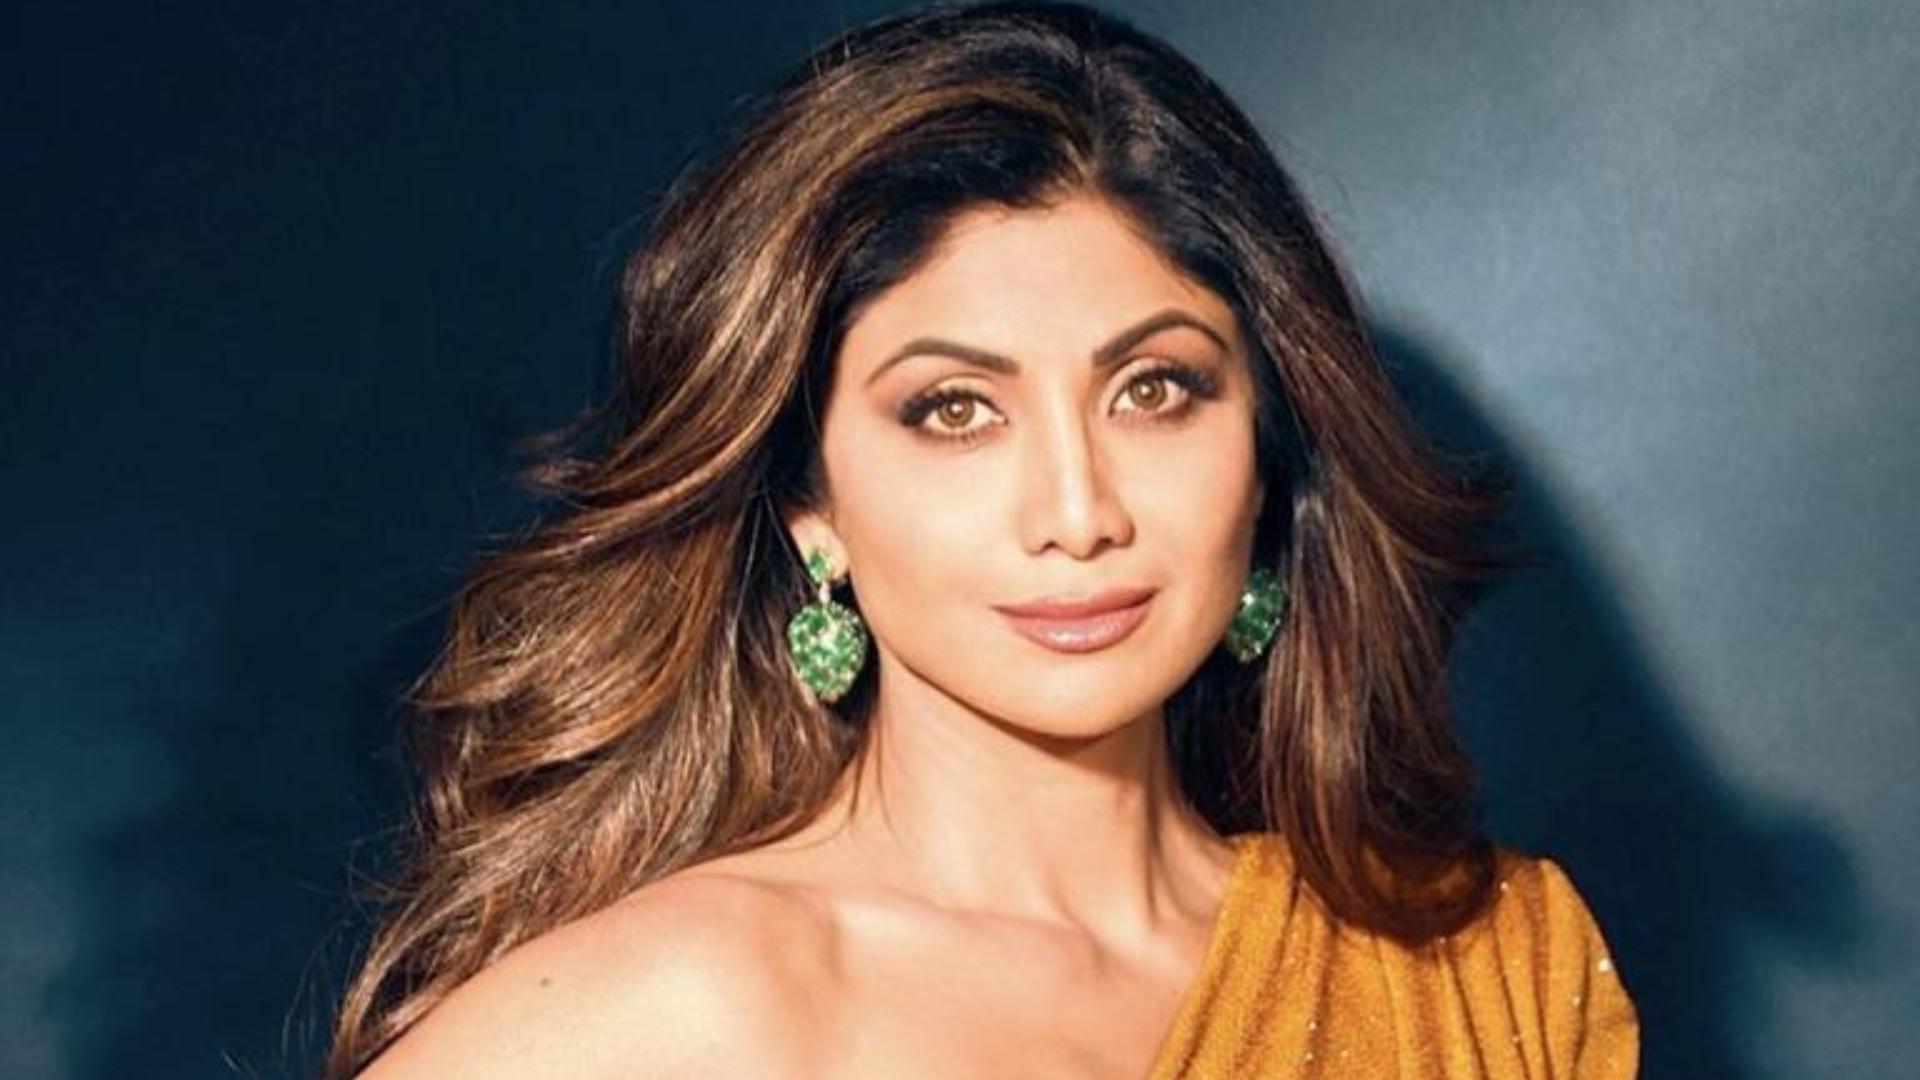 Shilpa Shetty Set to Make OTT Debut with “Indian Police Force” as First Woman Cop in Rohit Shetty’s ‘Bolly Copverse’